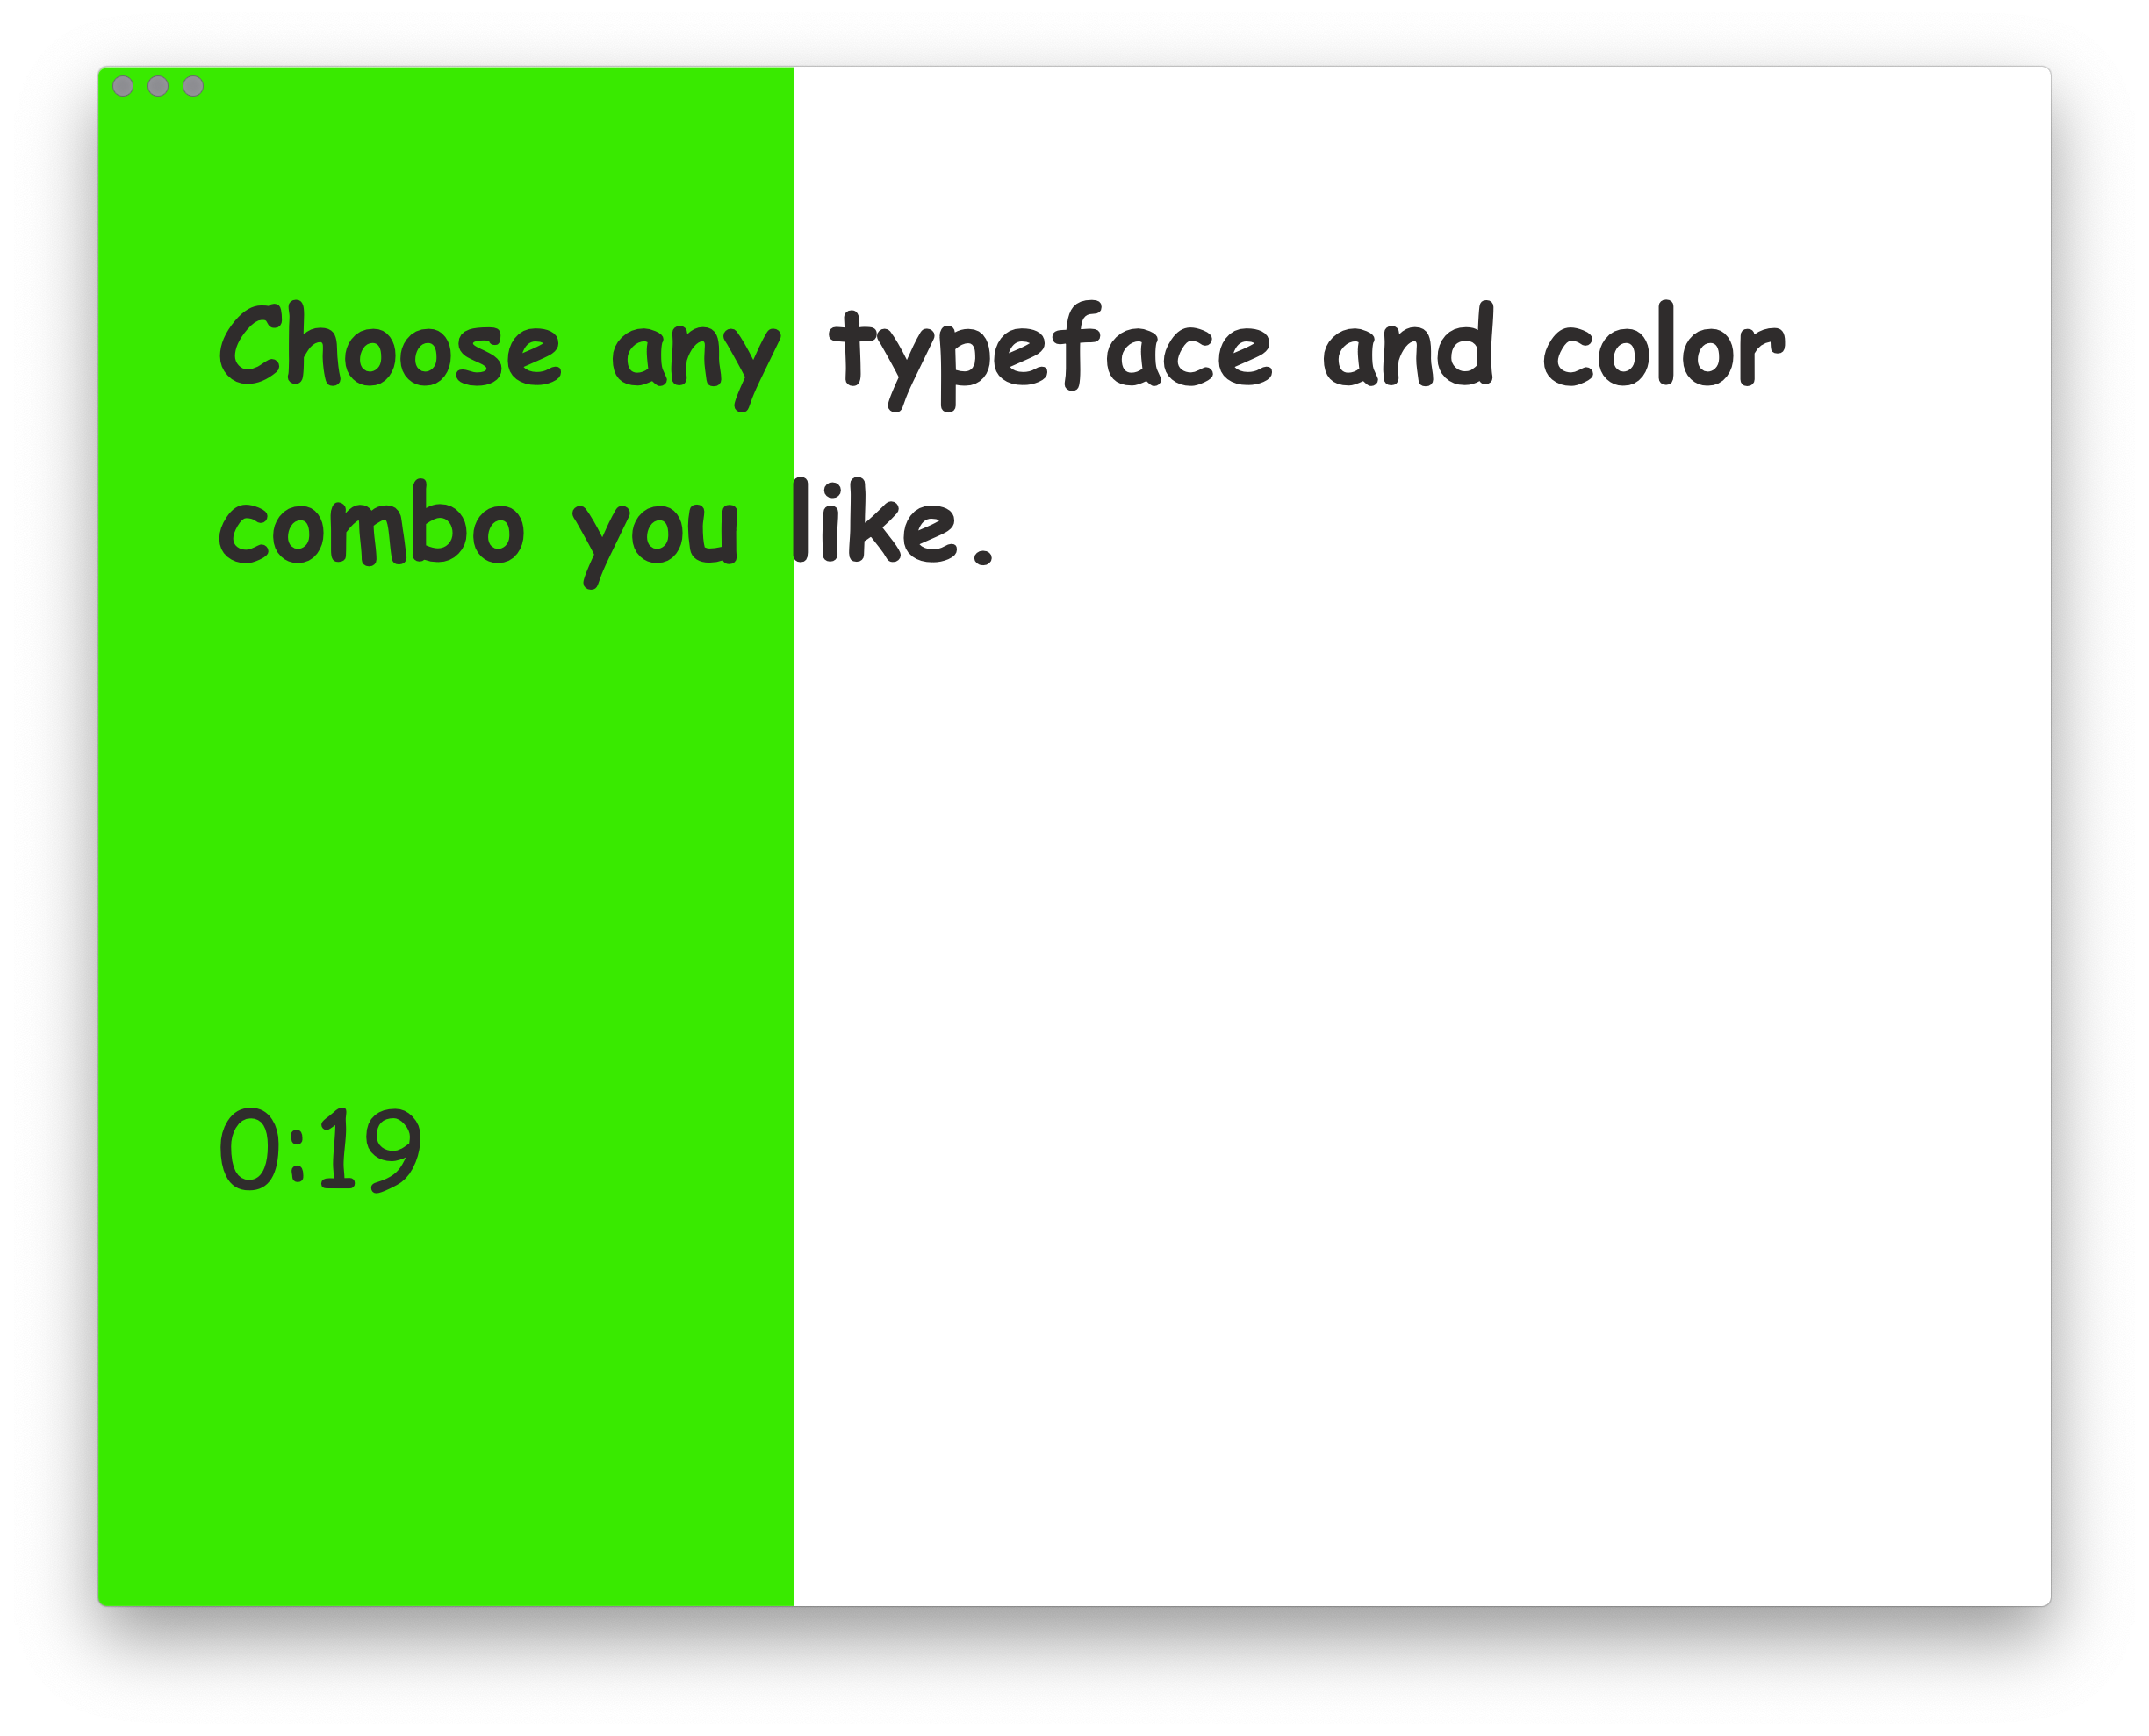 Choose any typeface and color combo you like.